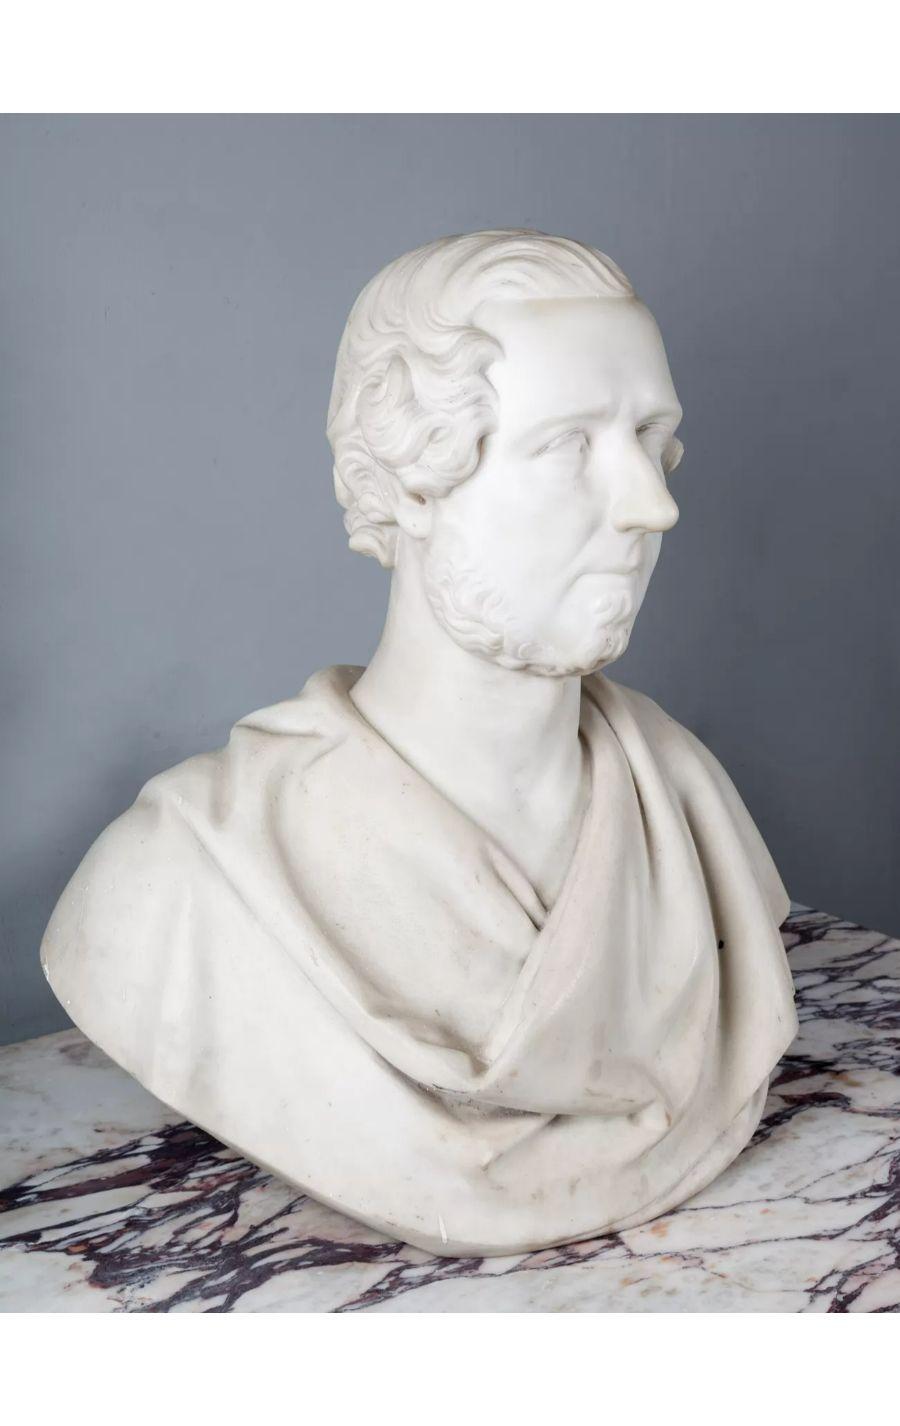 An antique marble bust of a bearded male in classical Roman attire.

Larger than life size and carved in pure white Italian statuary Carrara marble.

In un-restored original country house condition. Can be cleaned if required.

Circa